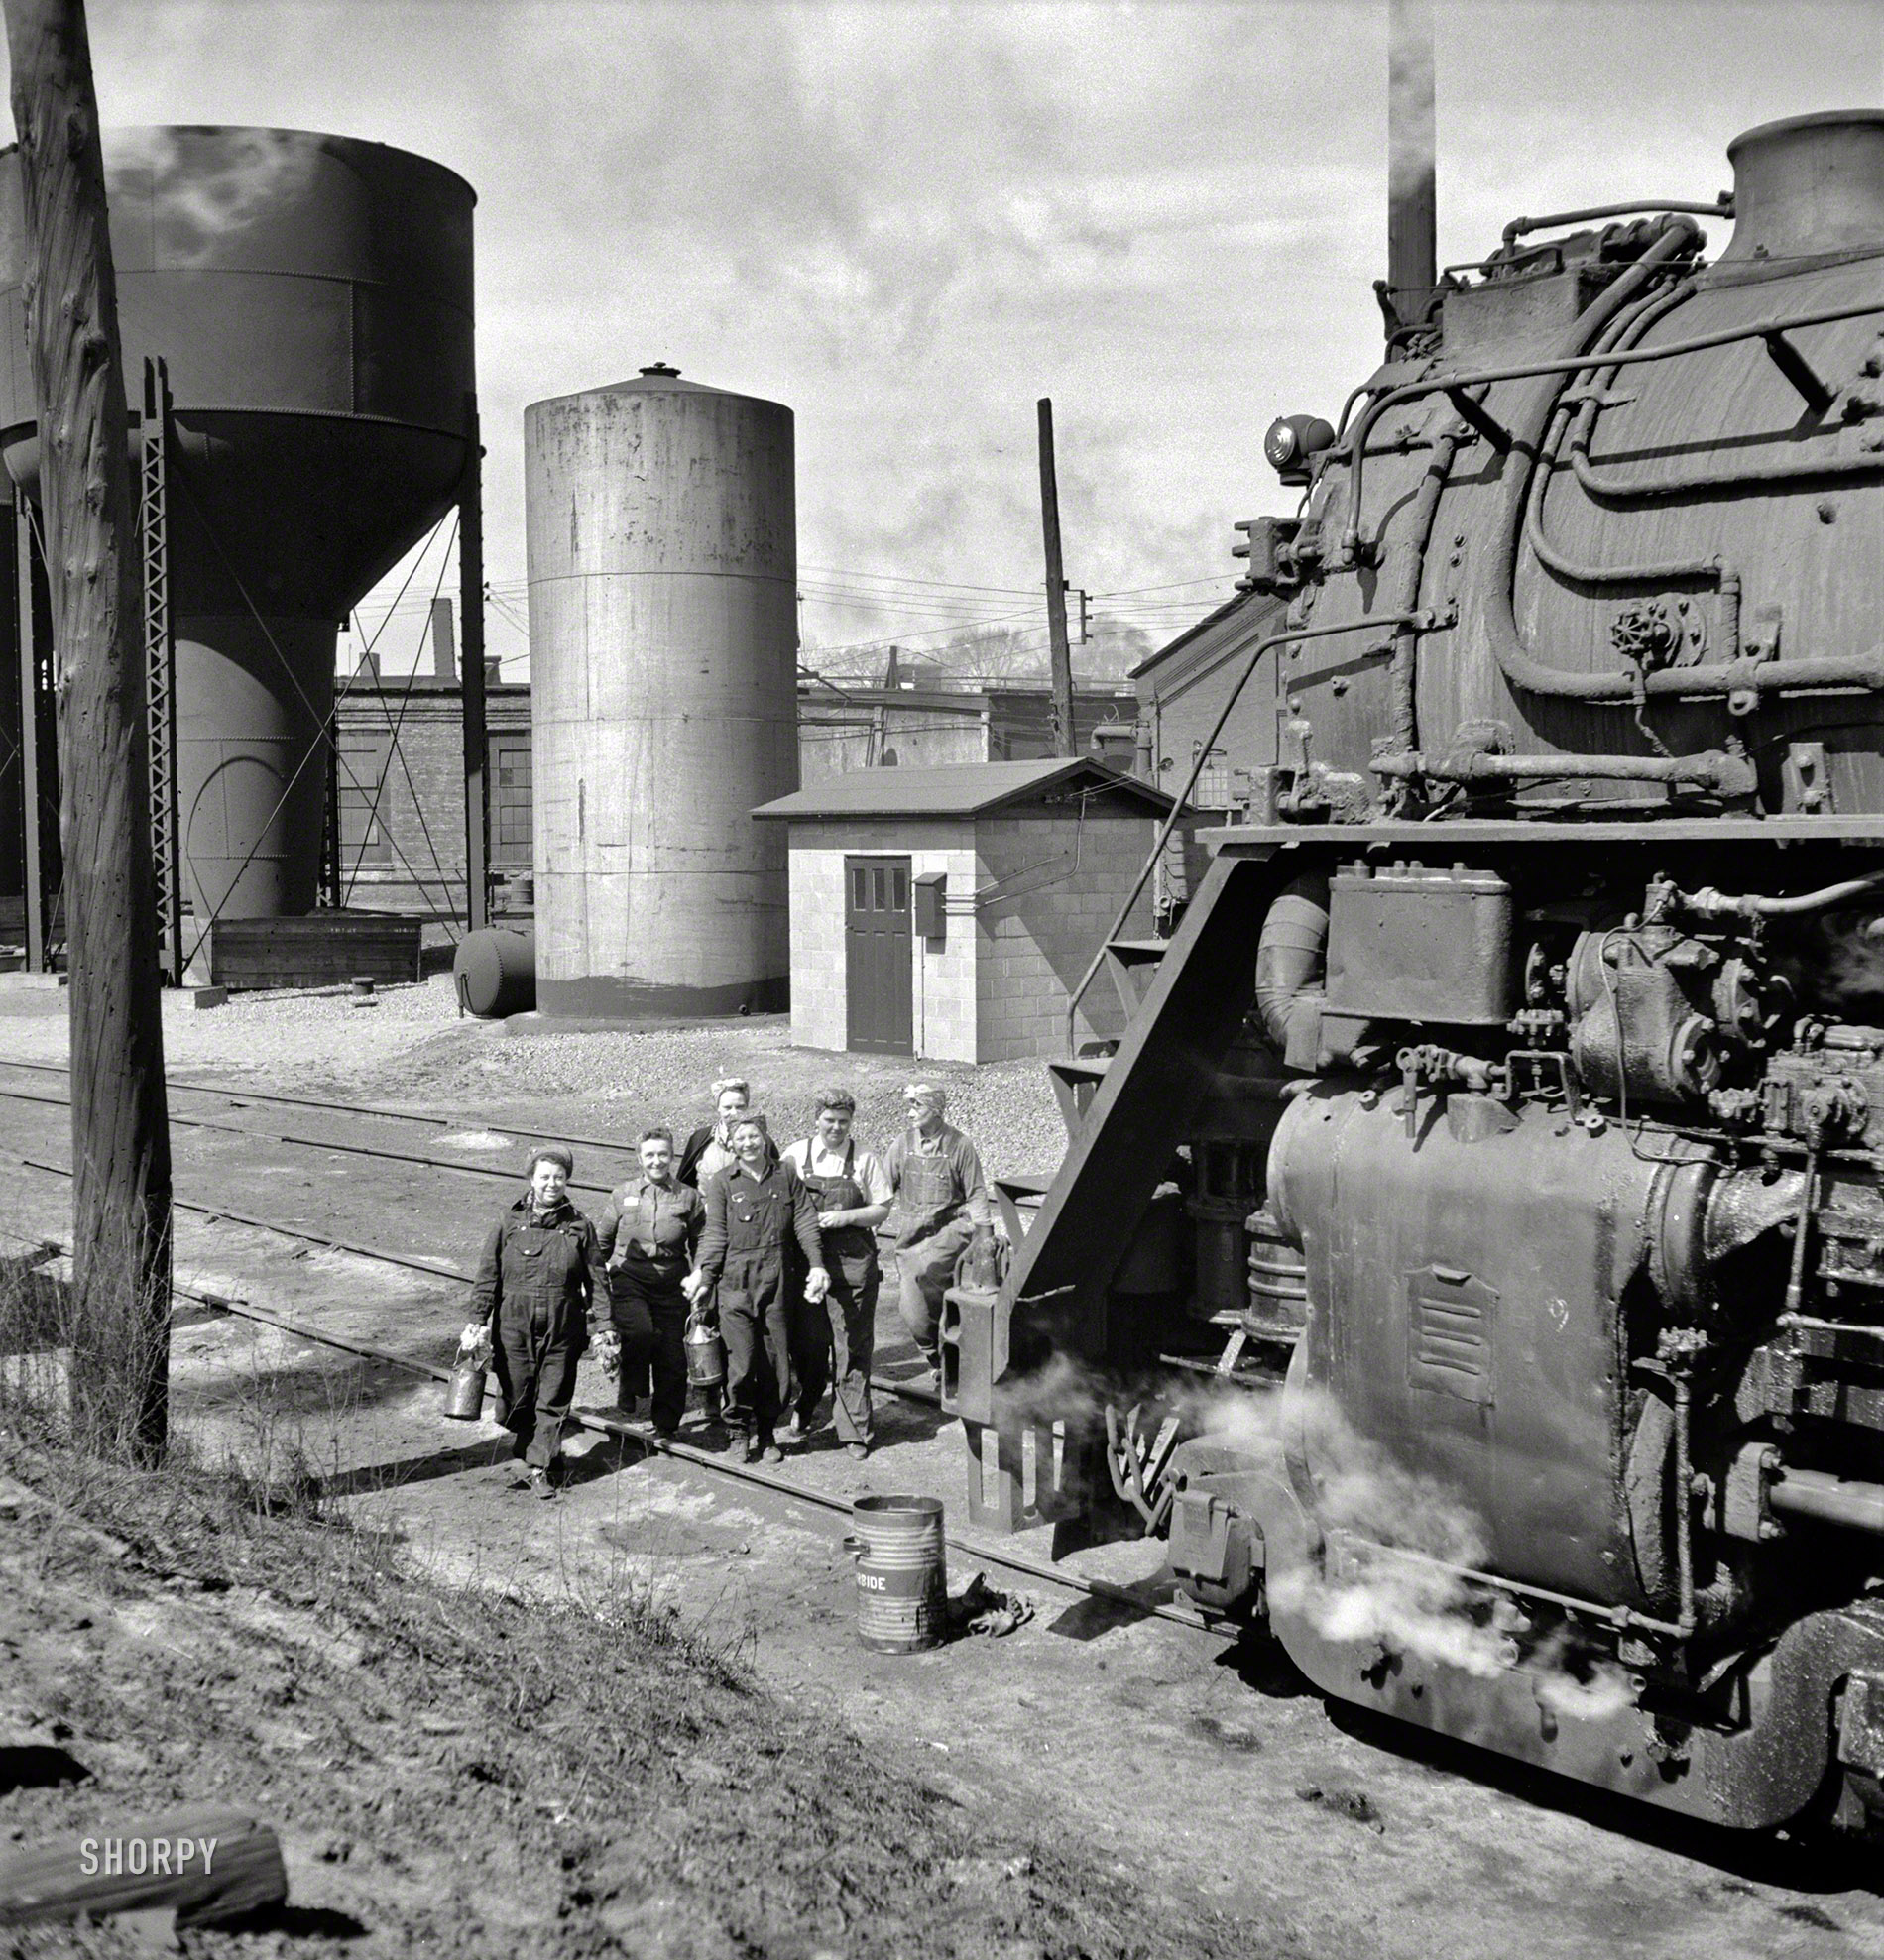 May 1943. Clinton, Iowa. "Women wipers of the Chicago & North Western Railroad going out to work on an engine at the roundhouse." Medium-format negative by Jack Delano for the Office of War Information. View full size.